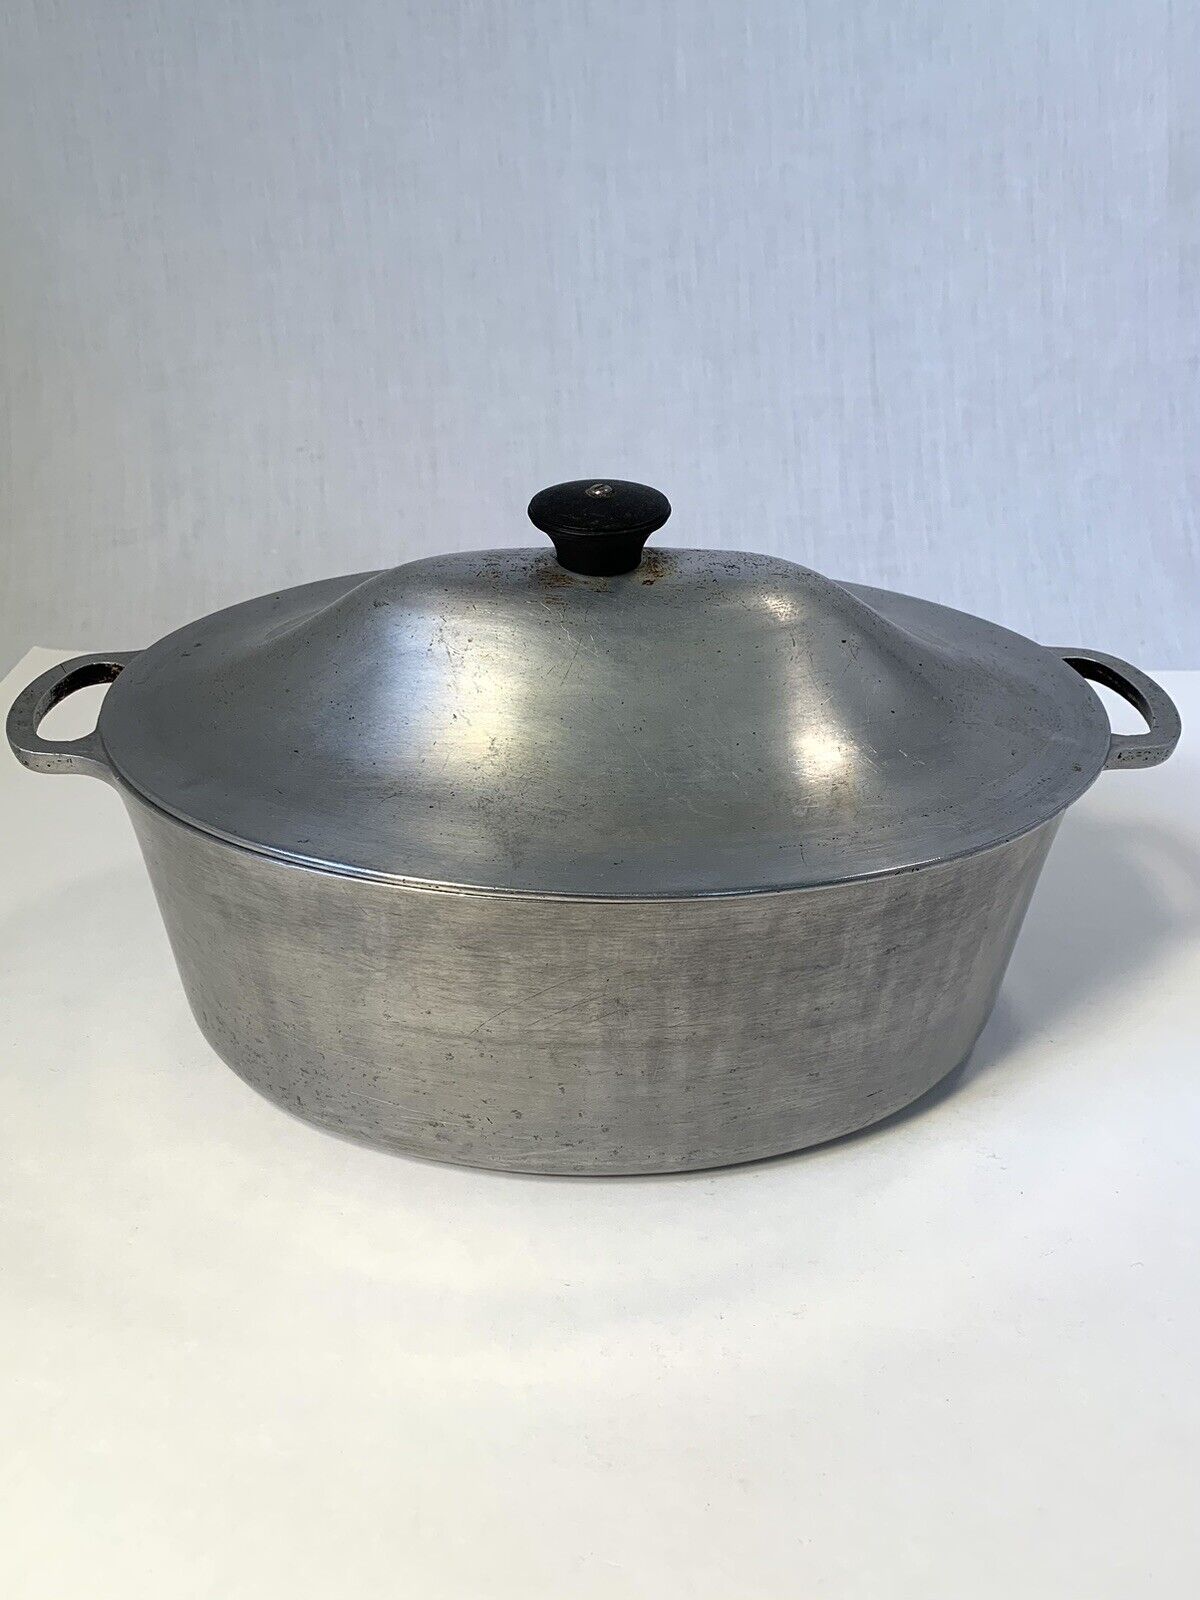 Vintage Cast-Rite Ware Aluminum Oval Roaster Dutch Oven With Lid